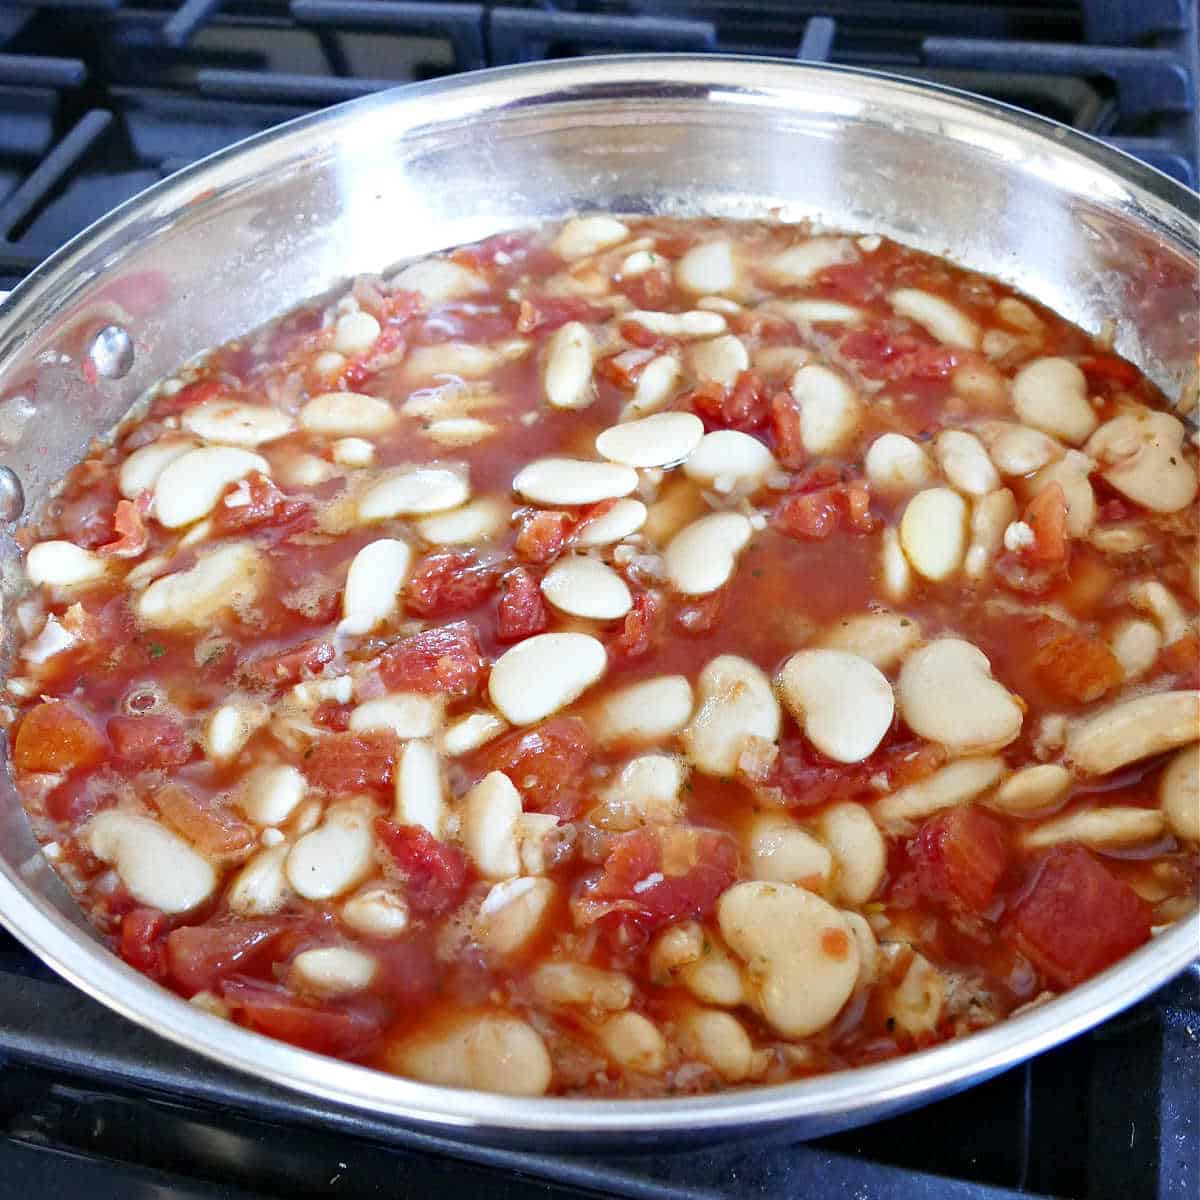 gigante beans simmering in tomatoes, shallots, garlic, and spices in a skillet